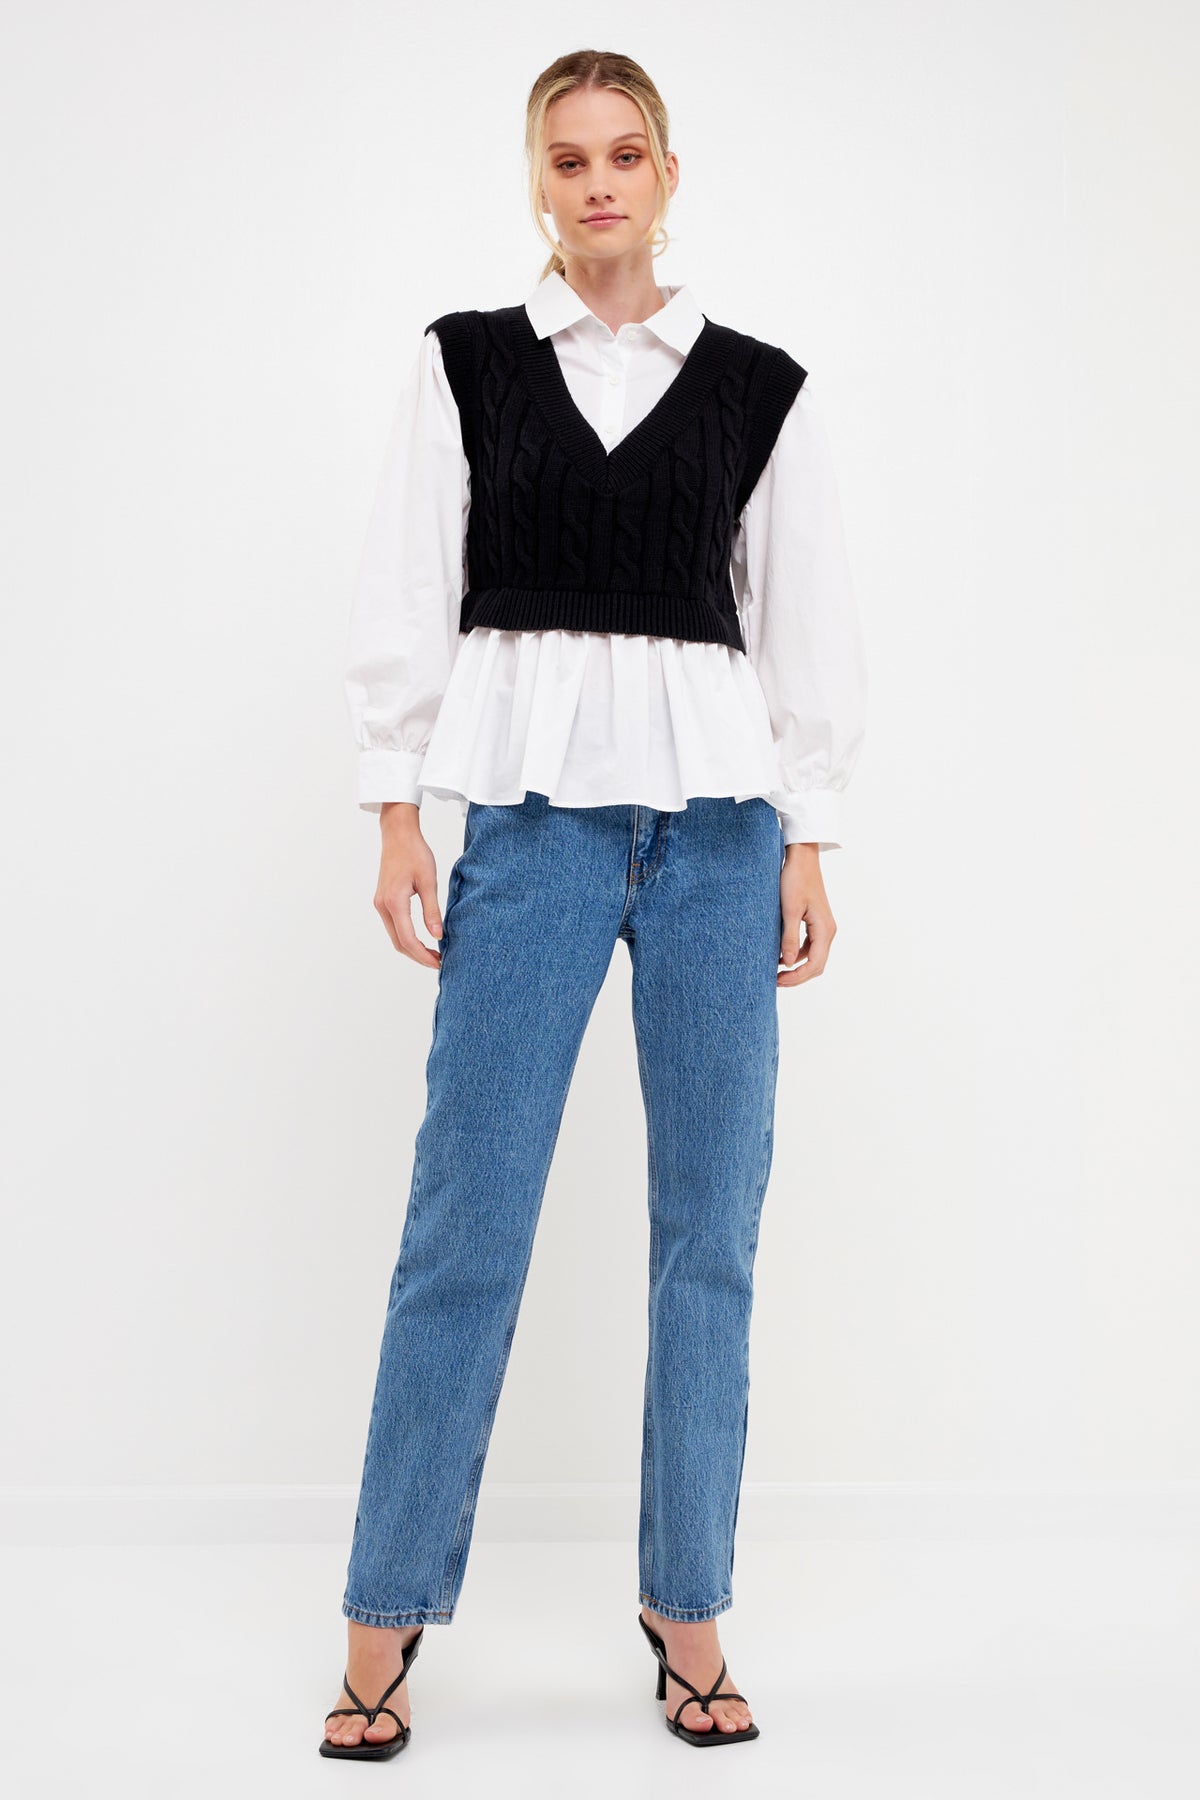 ENGLISH FACTORY - Mixed Media Sweater Vest Top - SWEATERS & KNITS available at Objectrare